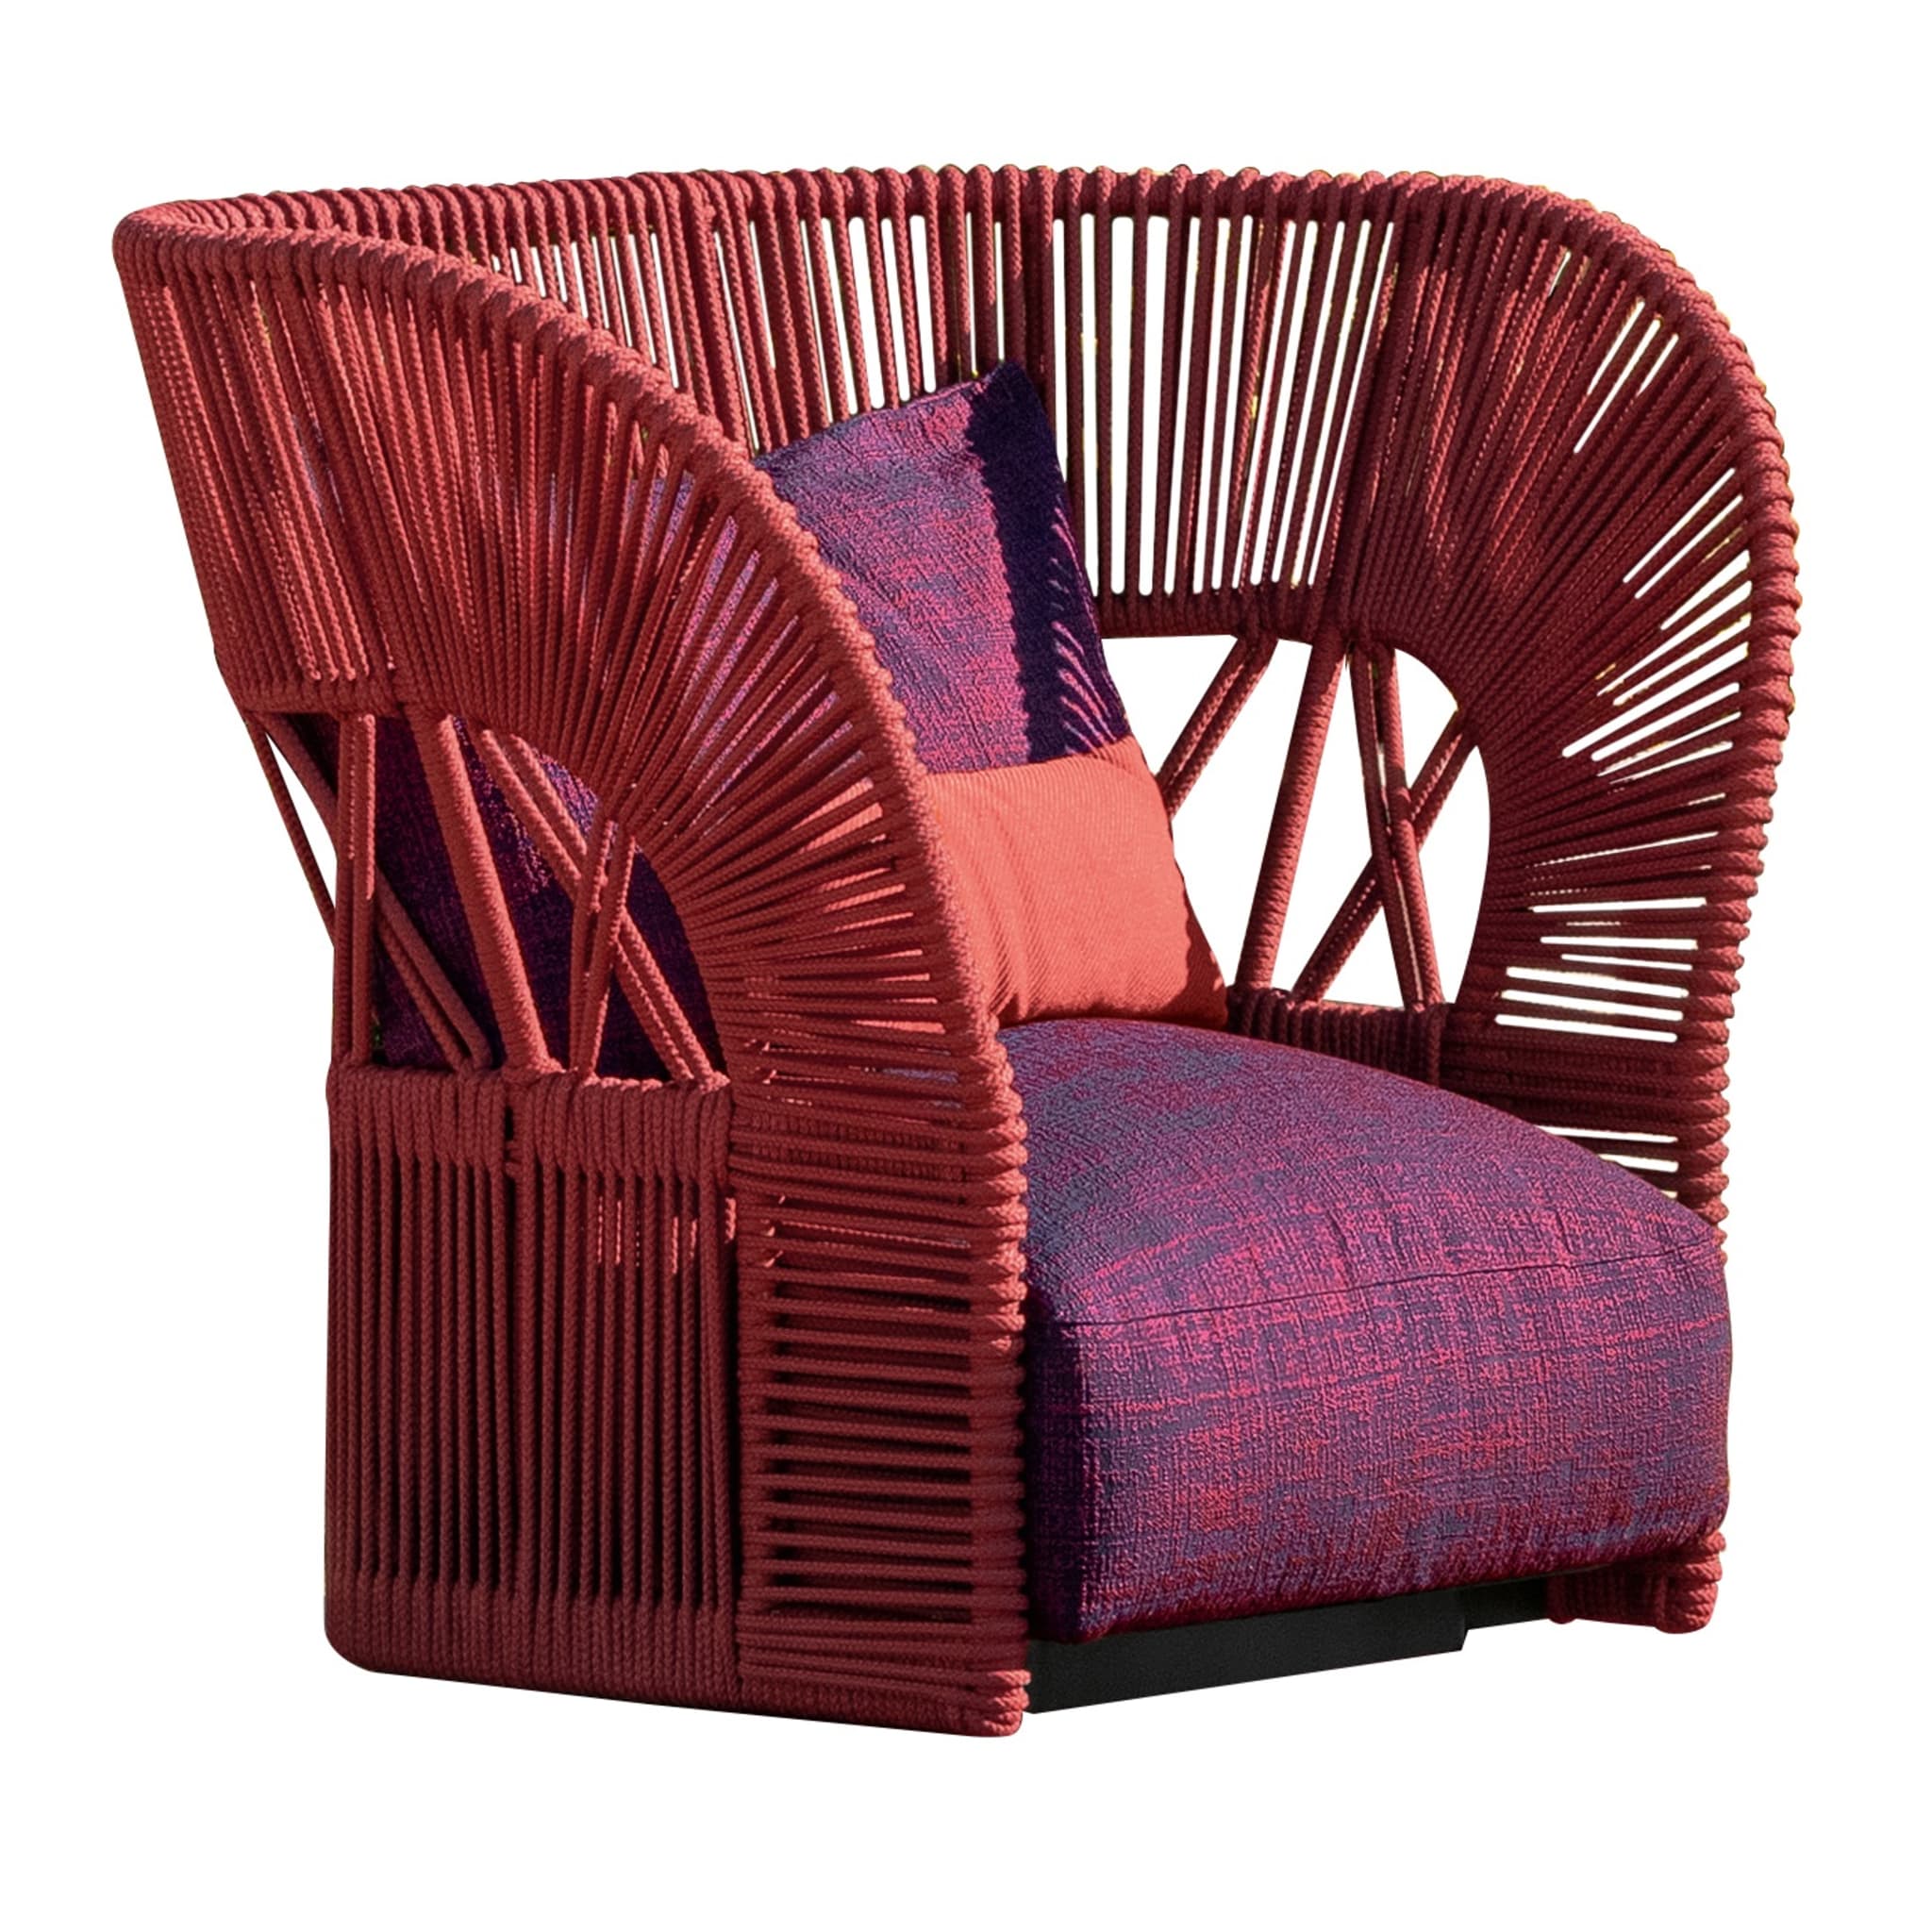 Cliff Deco Roter Lounge-sessel by Ludovica &amp; Roberto Palomba - Hauptansicht